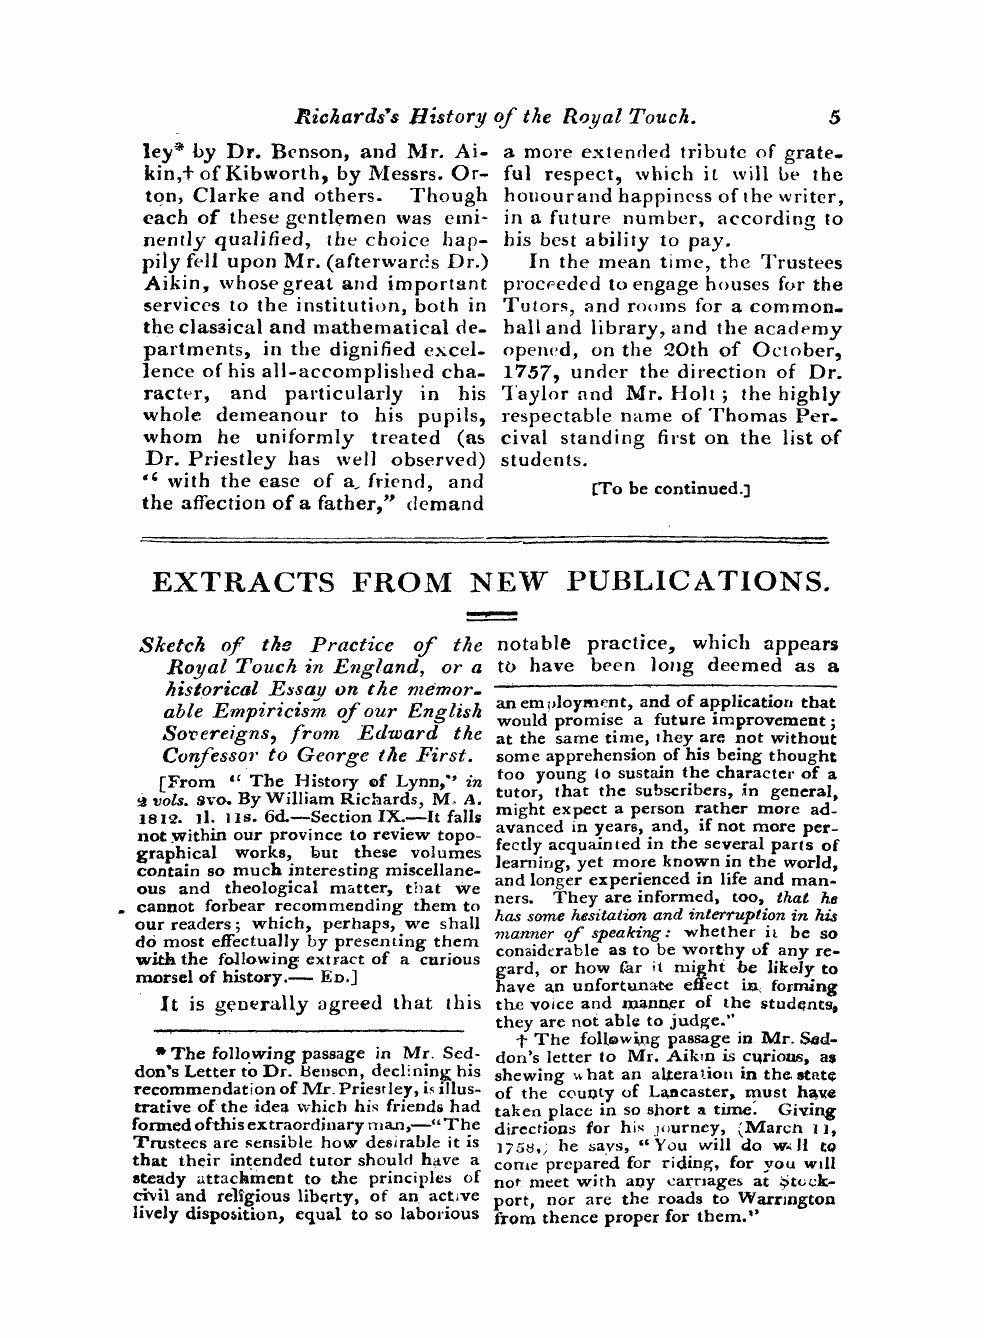 Monthly Repository (1806-1838) and Unitarian Chronicle (1832-1833): F Y, 1st edition - Extracts From New Publications.